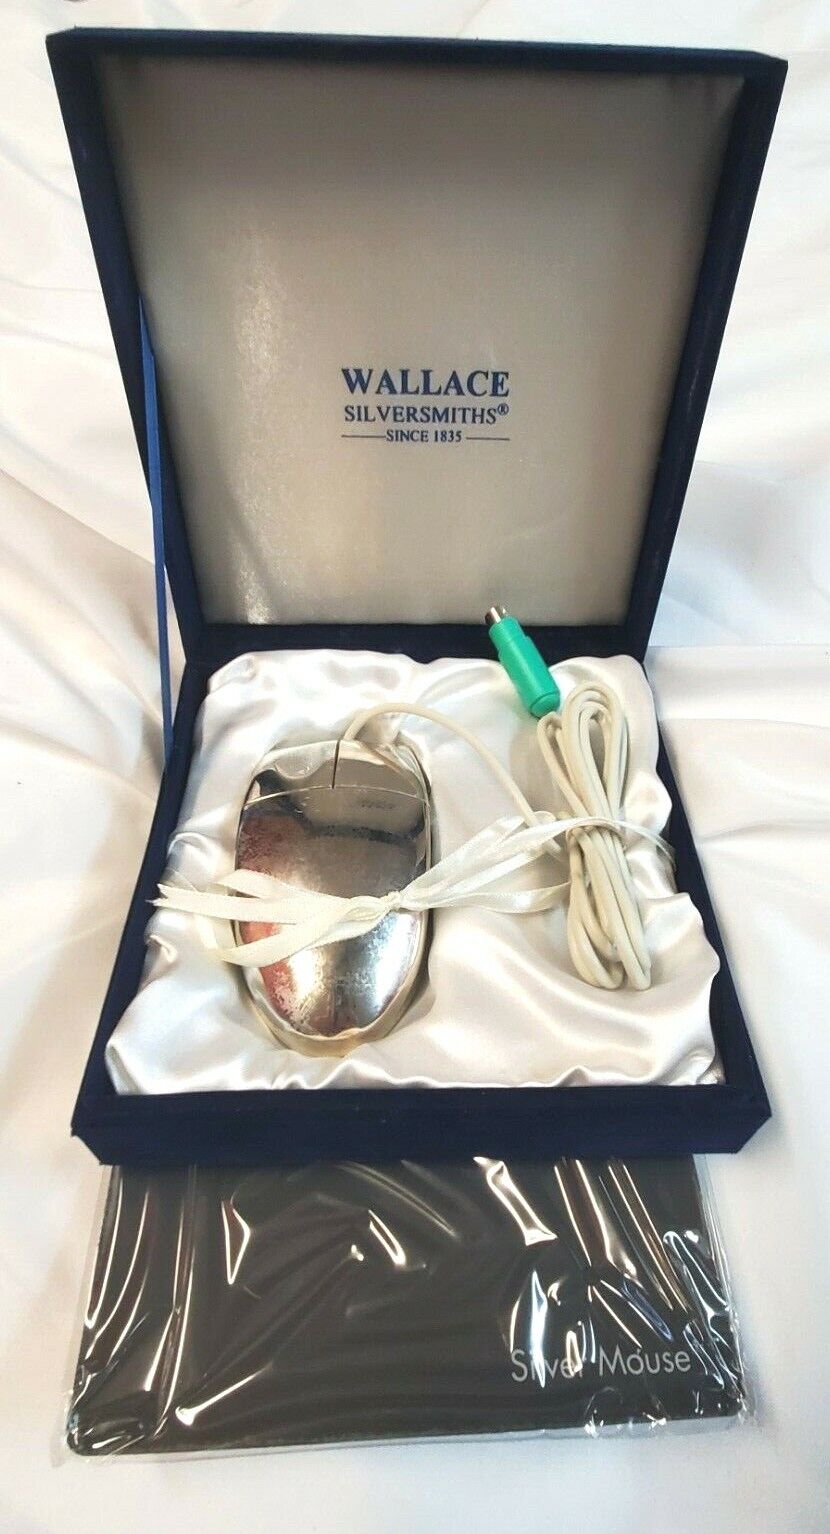 VTG WALLACE SILVERSMITH SILVER PLATED 2-BUTTON PS/2 MOUSE W/PAD MUO6P VELVET BOX